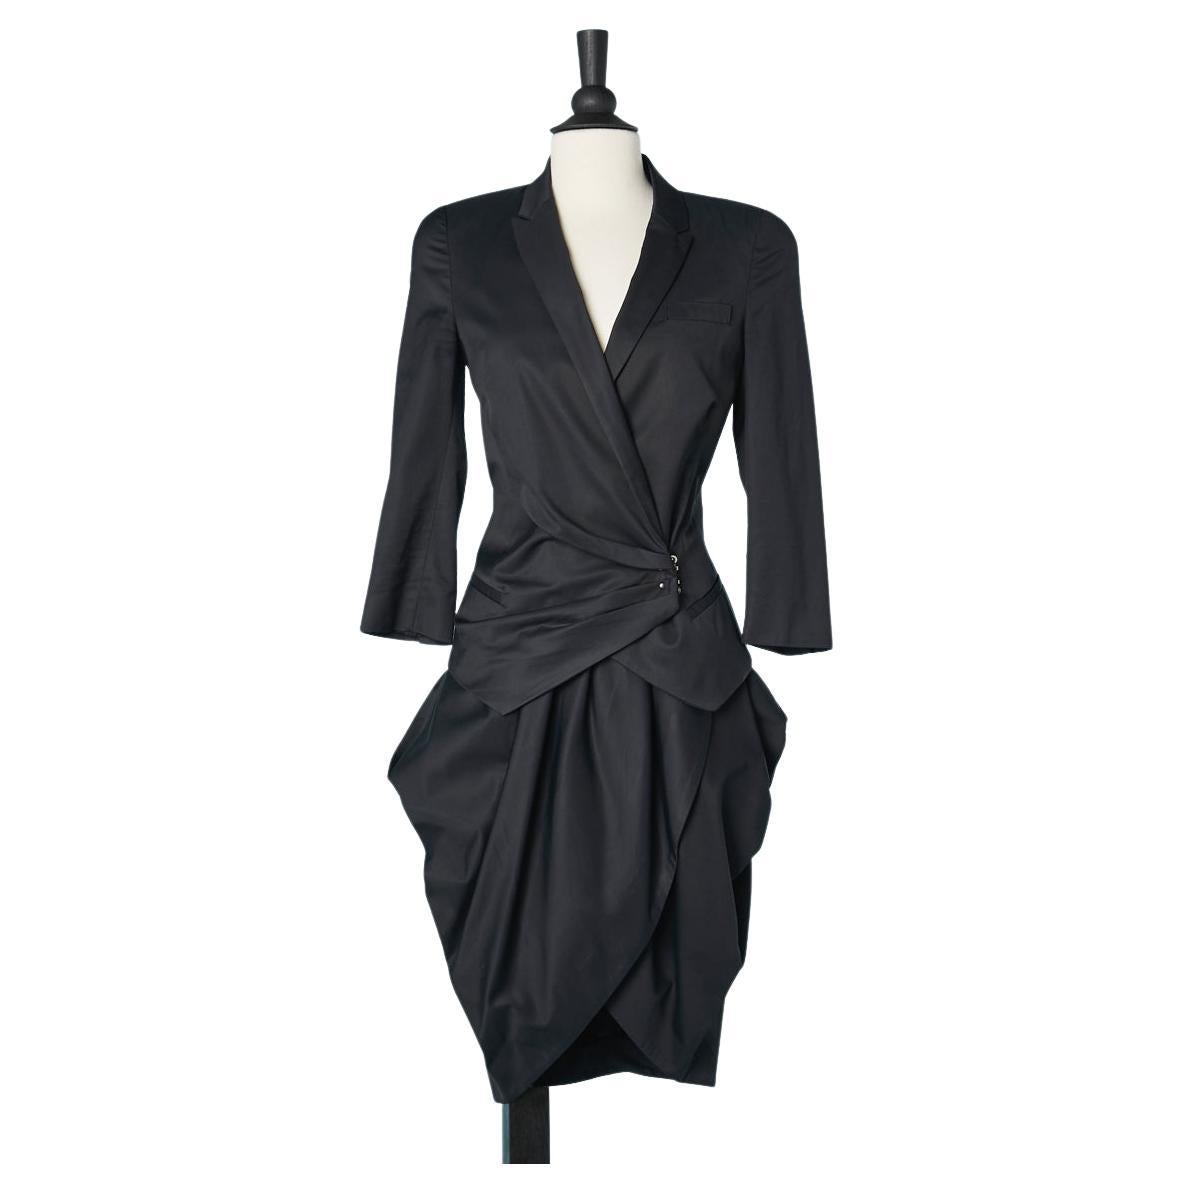 Black wrapped and drape skirt-suit McQ Alexander McQueen 